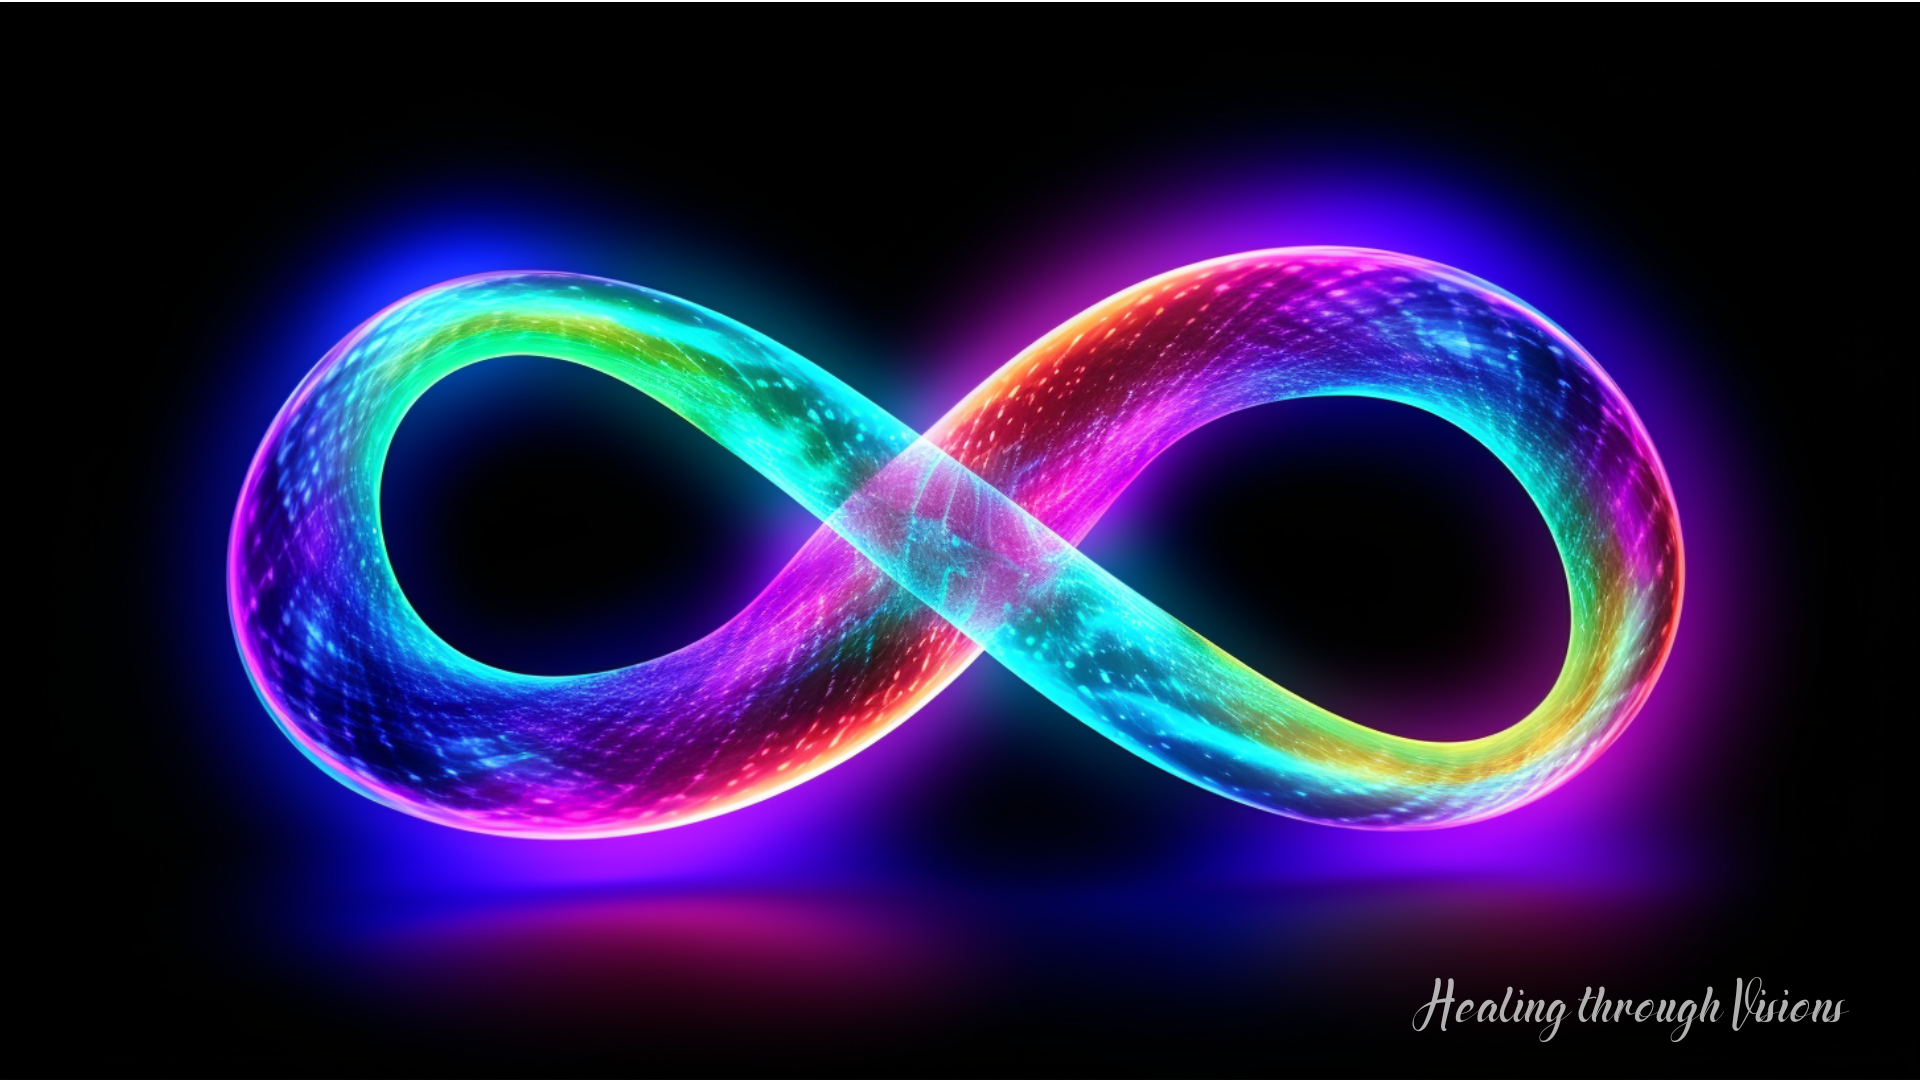 The image shows a vibrant and magical infinity symbol, with its looped figure-eight shape rendered in bright, vivid colors. The colors appear to swirl and flow within the symbol, with shades of blue, purple, and green merging and blending together. The overall effect is one of movement, energy, and dynamic creativity, as if the symbol is alive and pulsing with its own unique power. The symbol appears to be suspended in a bright, glowing space, surrounded by stars and other celestial objects.